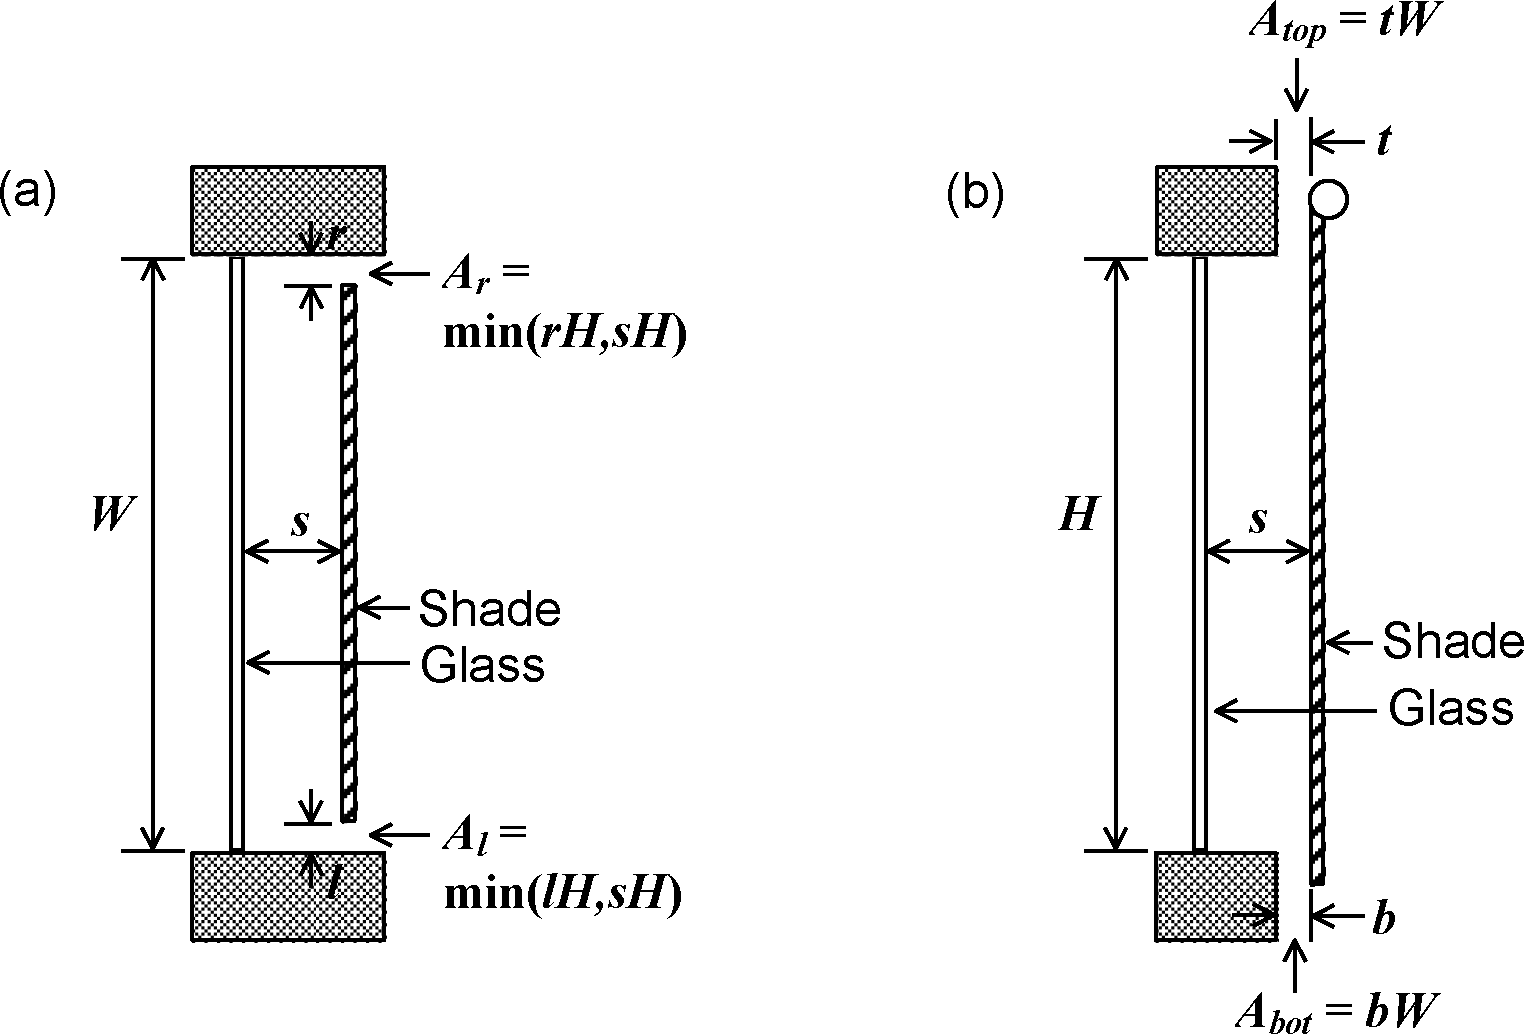 Examples of openings for an interior shading layer covering glass of height H and width W. Not to scale. (a) Horizontal section through shading layer with openings on the left and right sides (top view). (b) Vertical section through shading layer with openings at the top and bottom (side view). [fig:examples-of-openings-for-an-interior-shading]